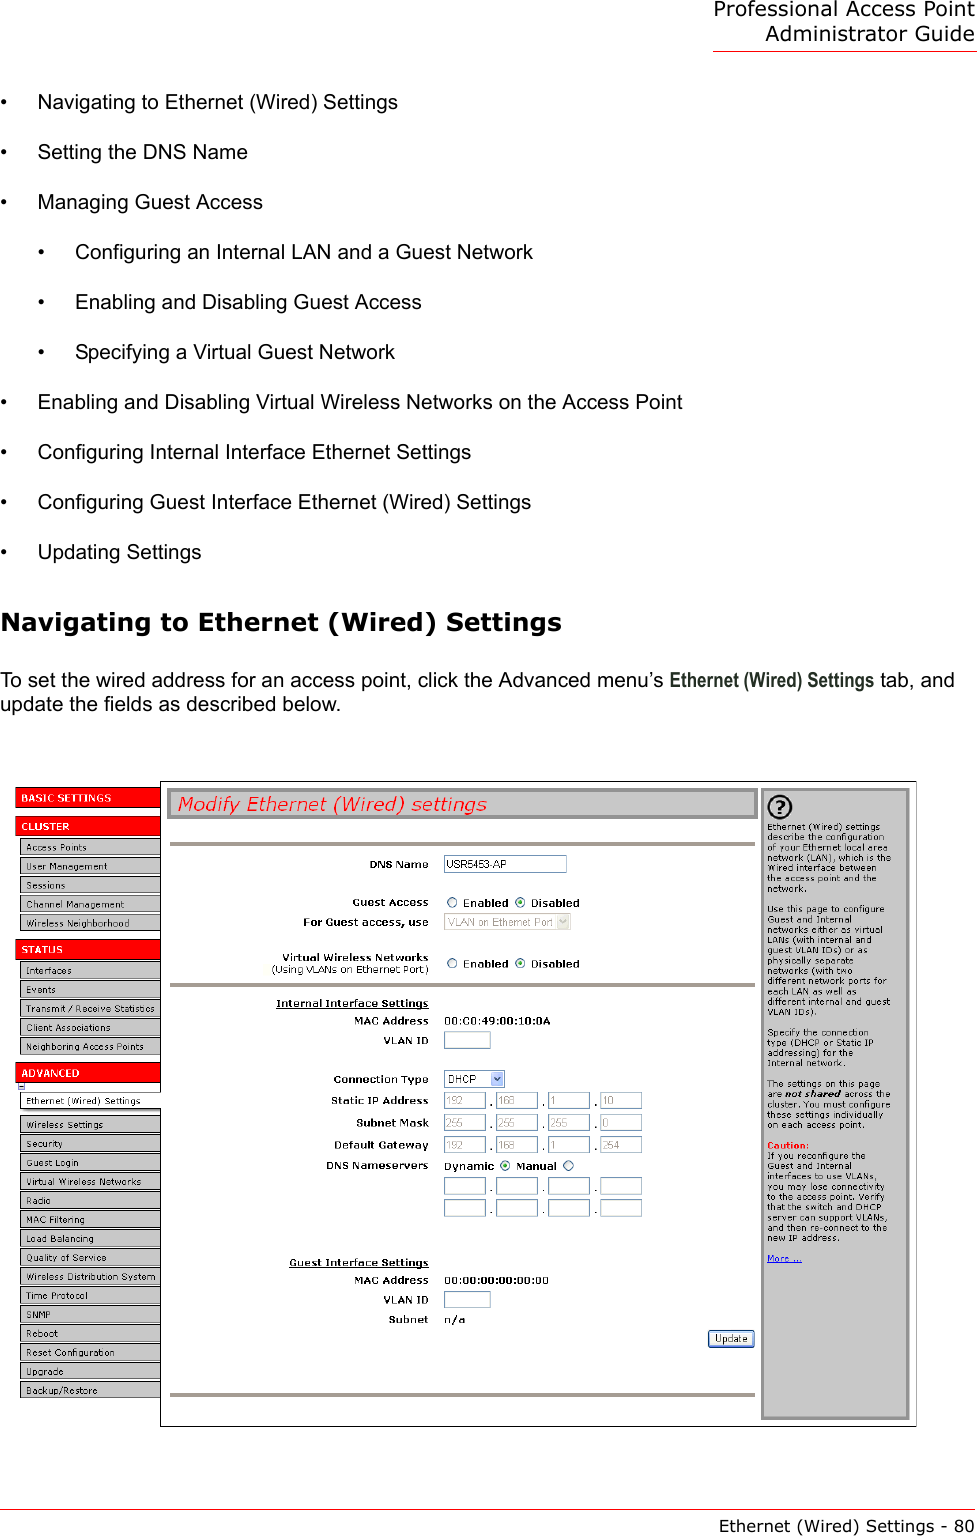 Professional Access Point Administrator GuideEthernet (Wired) Settings - 80•Navigating to Ethernet (Wired) Settings•Setting the DNS Name•Managing Guest Access•Configuring an Internal LAN and a Guest Network•Enabling and Disabling Guest Access•Specifying a Virtual Guest Network•Enabling and Disabling Virtual Wireless Networks on the Access Point•Configuring Internal Interface Ethernet Settings•Configuring Guest Interface Ethernet (Wired) Settings•Updating SettingsNavigating to Ethernet (Wired) SettingsTo set the wired address for an access point, click the Advanced menu’s Ethernet (Wired) Settings tab, and update the fields as described below.